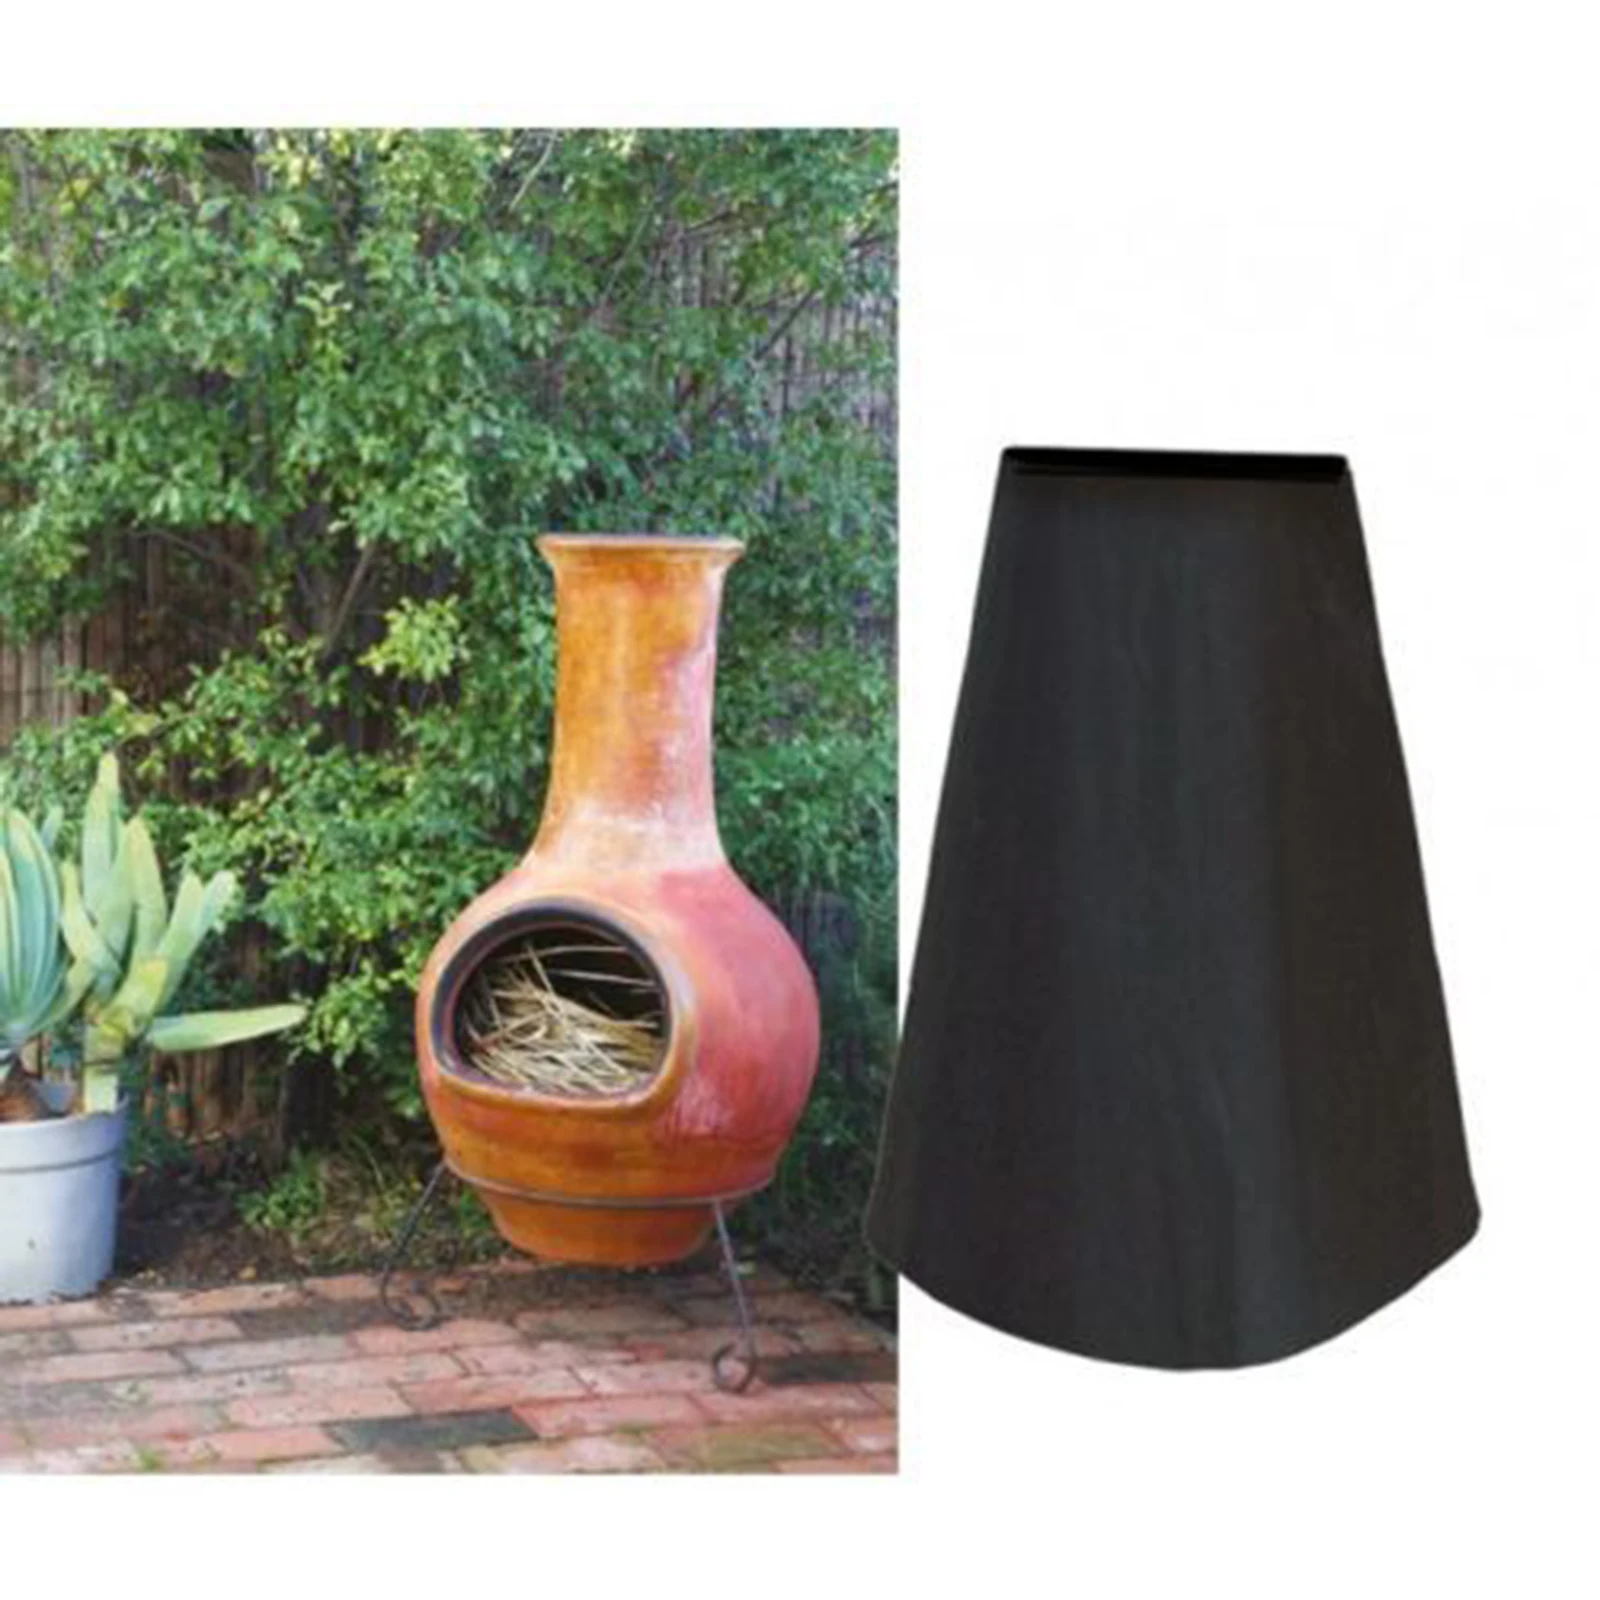 1 Piece Lawn Yard Patio Chiminea Covers Outdoor Fire Pit Dust Sun Protection Waterproof Garden Fire Pit Cover Supplies